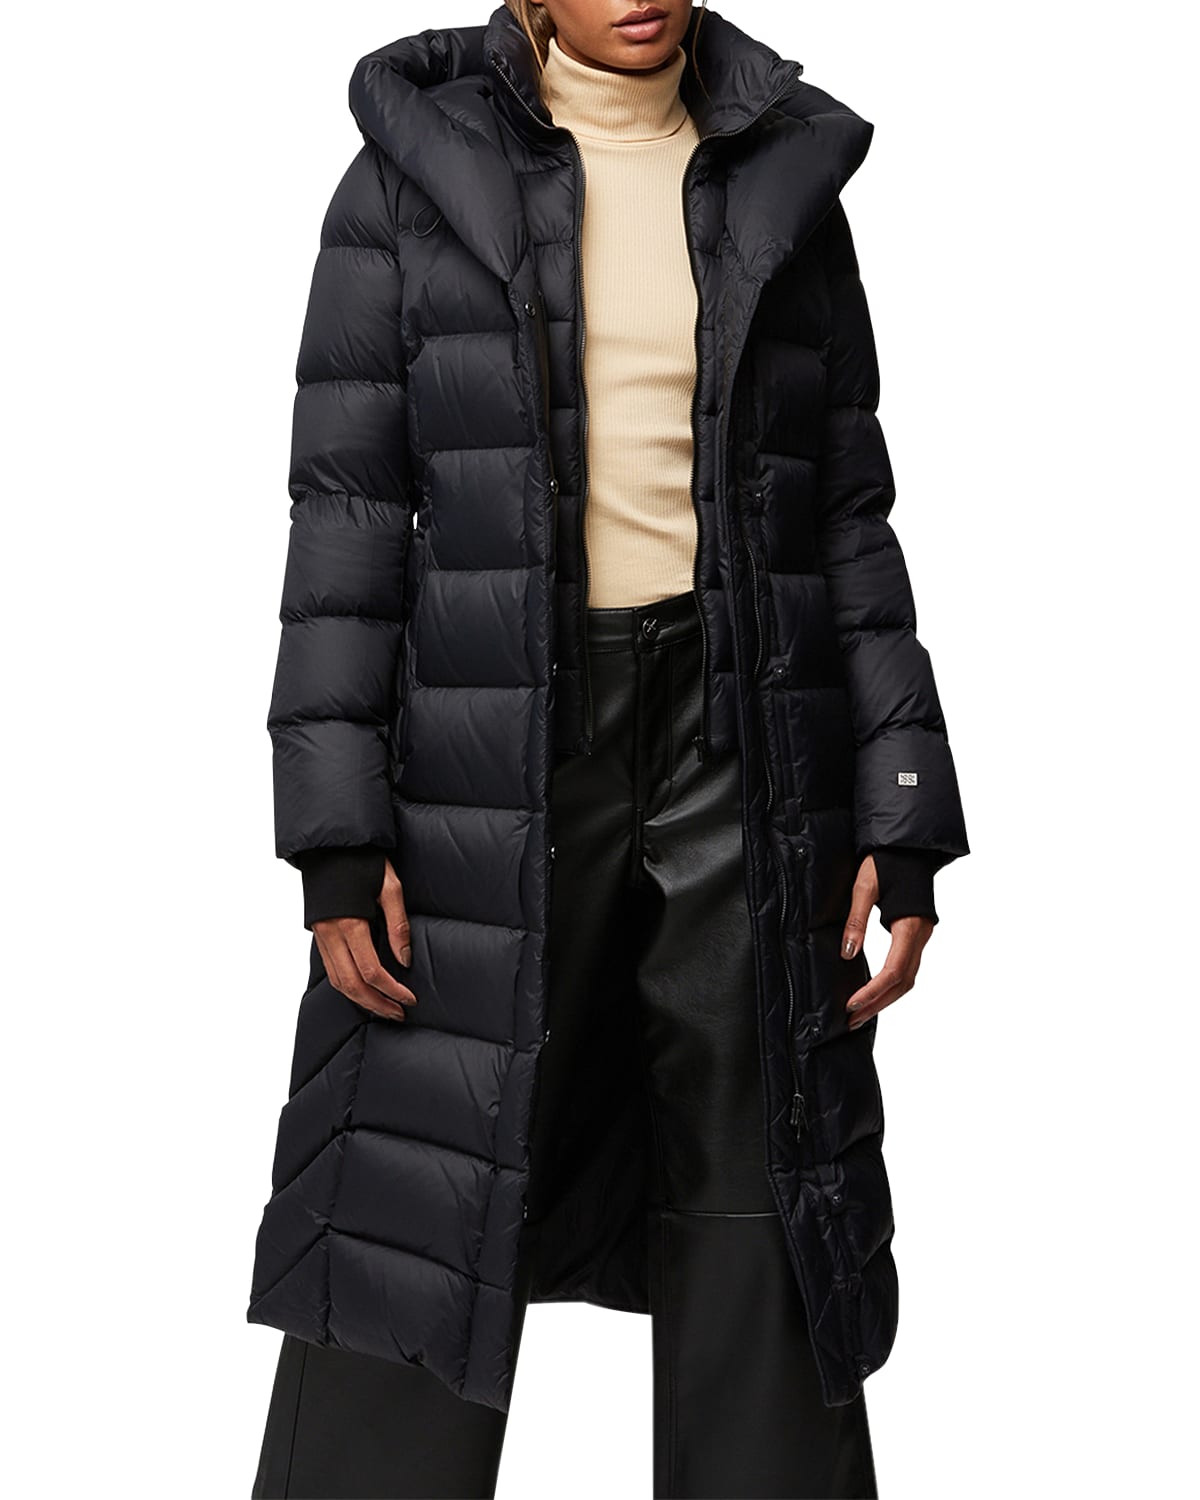 Soia & Kyo Quilted Long Coat | Smart Closet